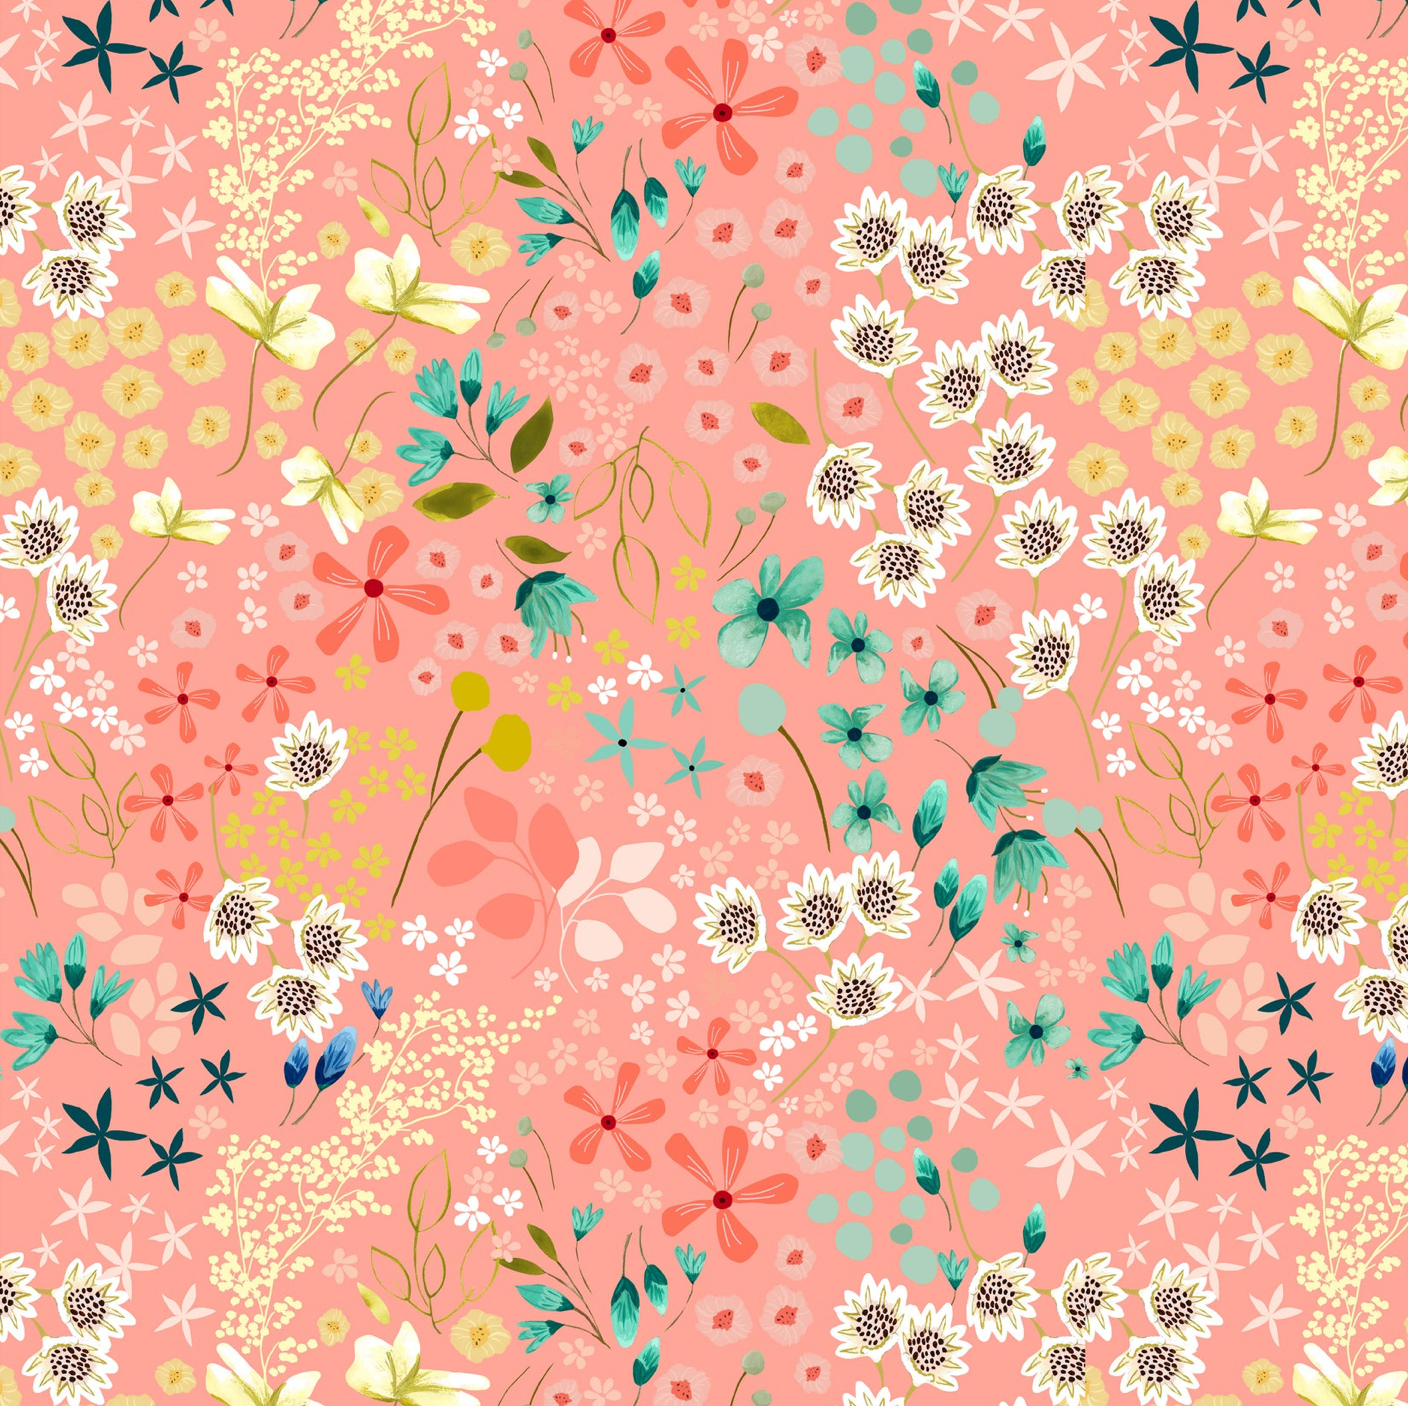 Serenity Blooms, Meadow Dream Coral, SR24510, sold by the 1/2 yard, *PREORDER